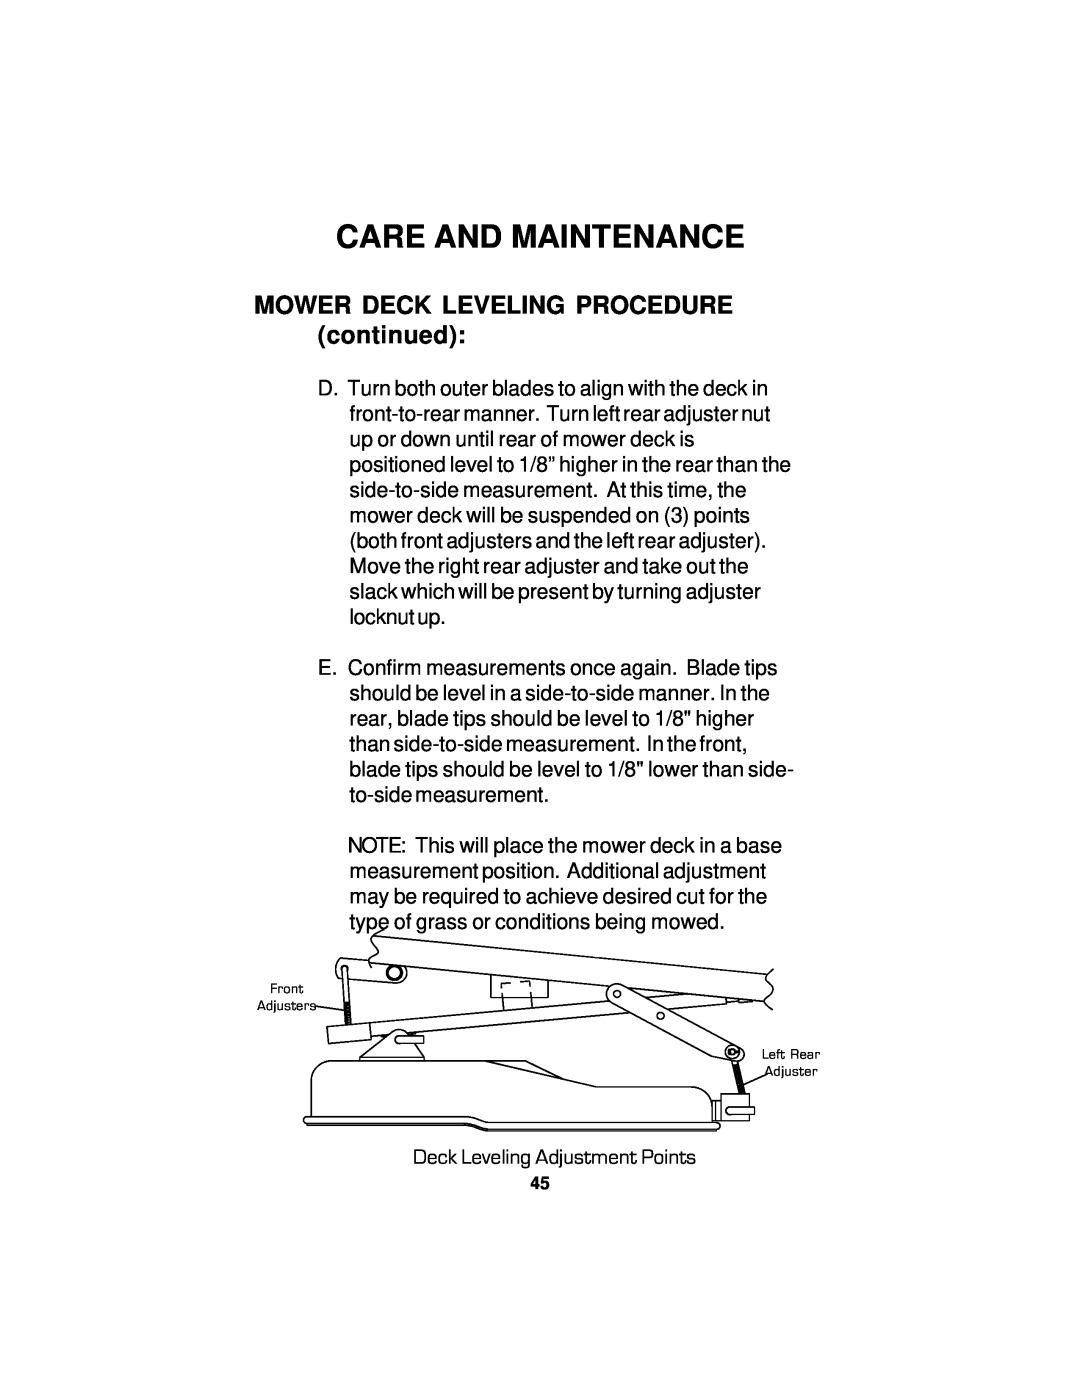 Dixon 18124-0804 manual MOWER DECK LEVELING PROCEDURE continued, Care And Maintenance, Deck Leveling Adjustment Points 